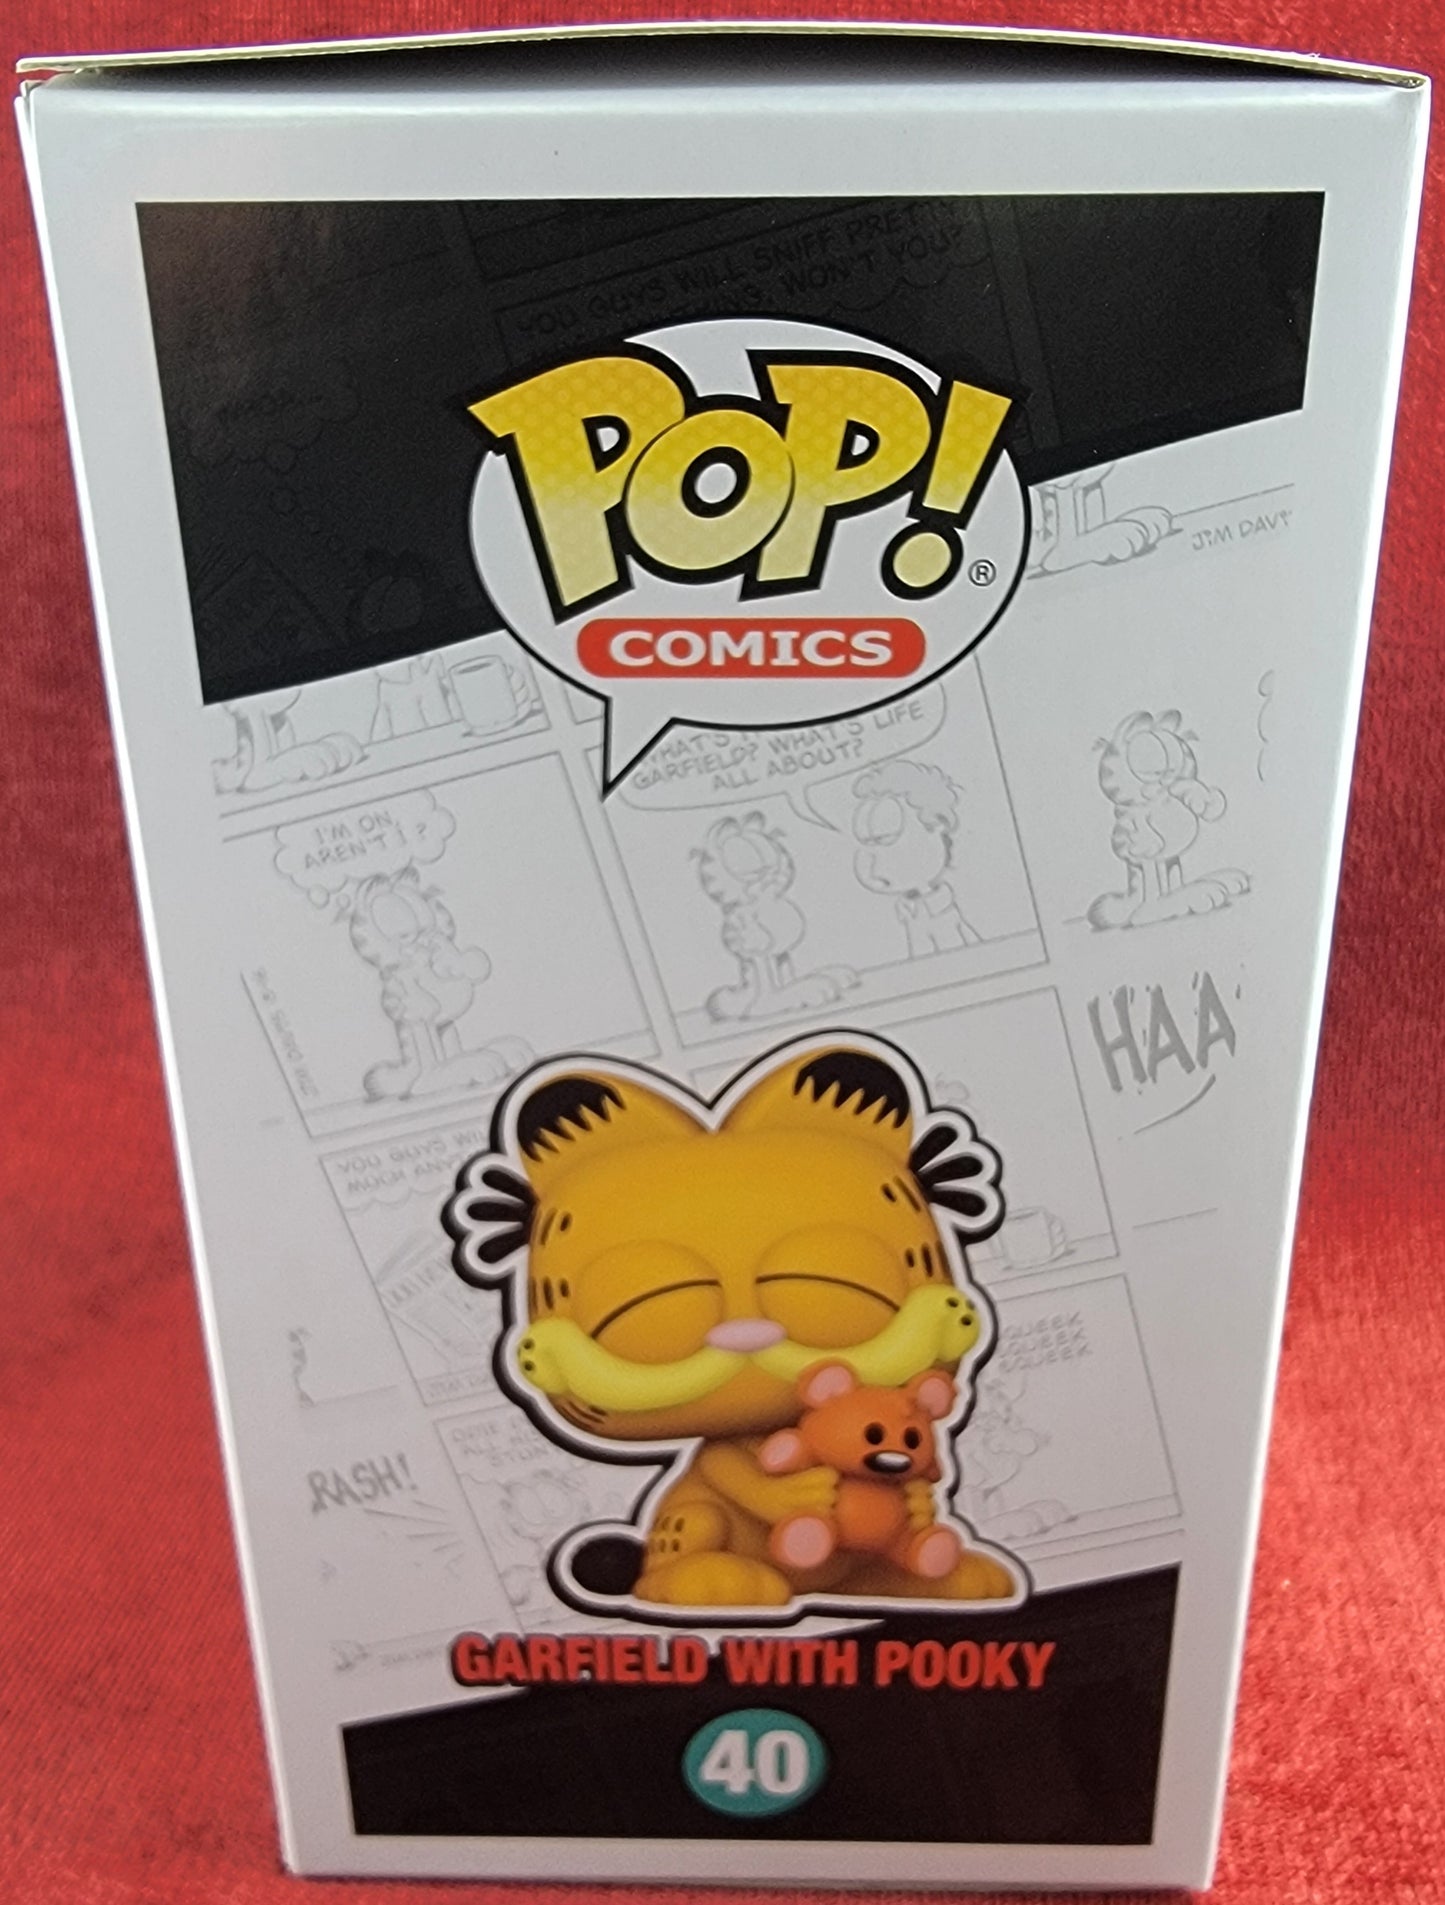 Garfield with pooky funko # 40 (nib)
With pop protector